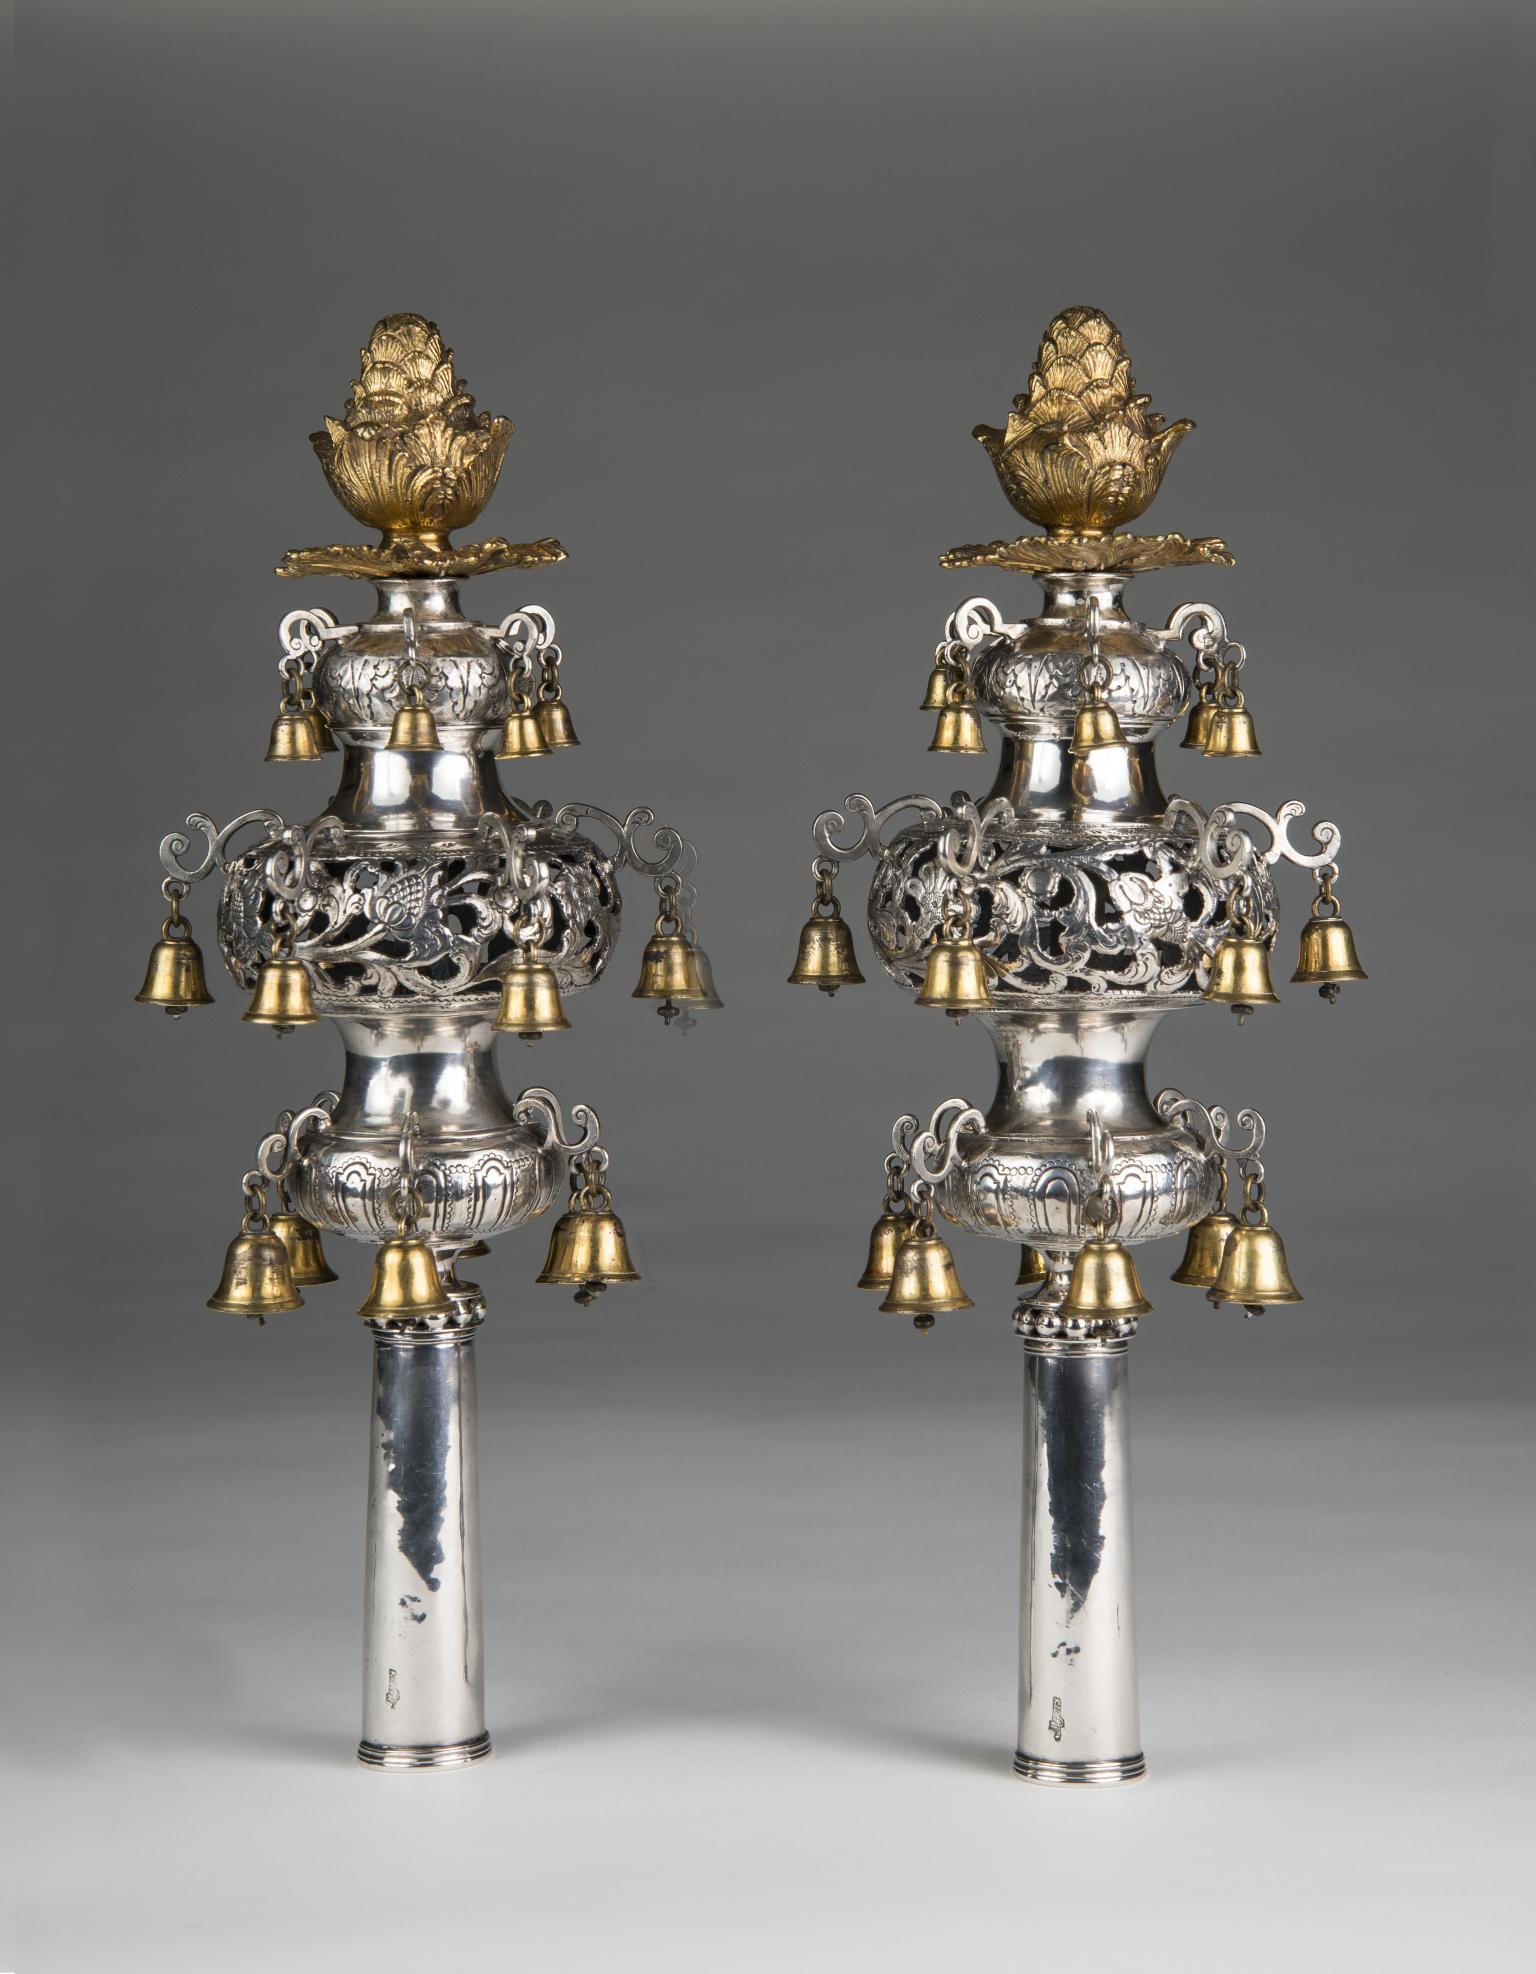 Pair of silver Torah finials with crowns on top.